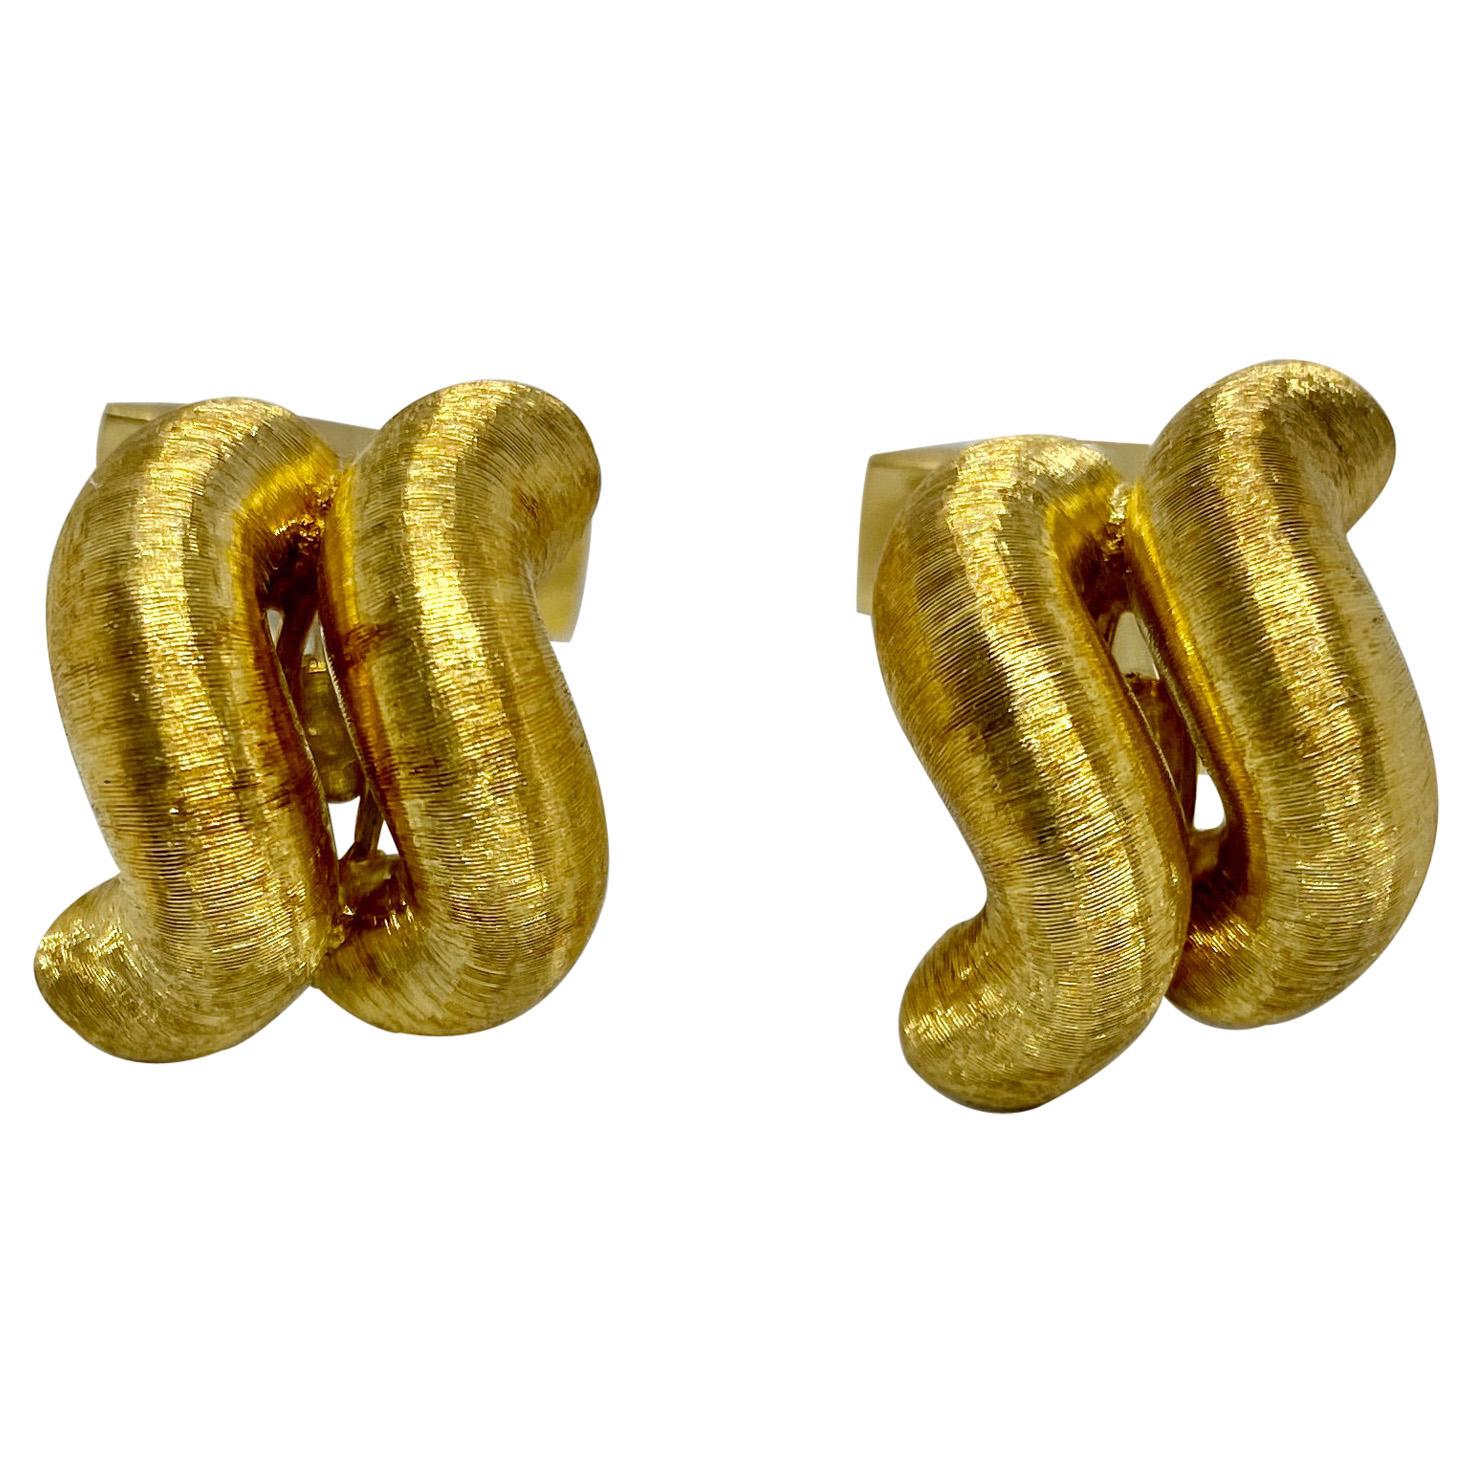 "San Marco" Cufflinks in 18K Yellow Gold by Buccellati For Sale